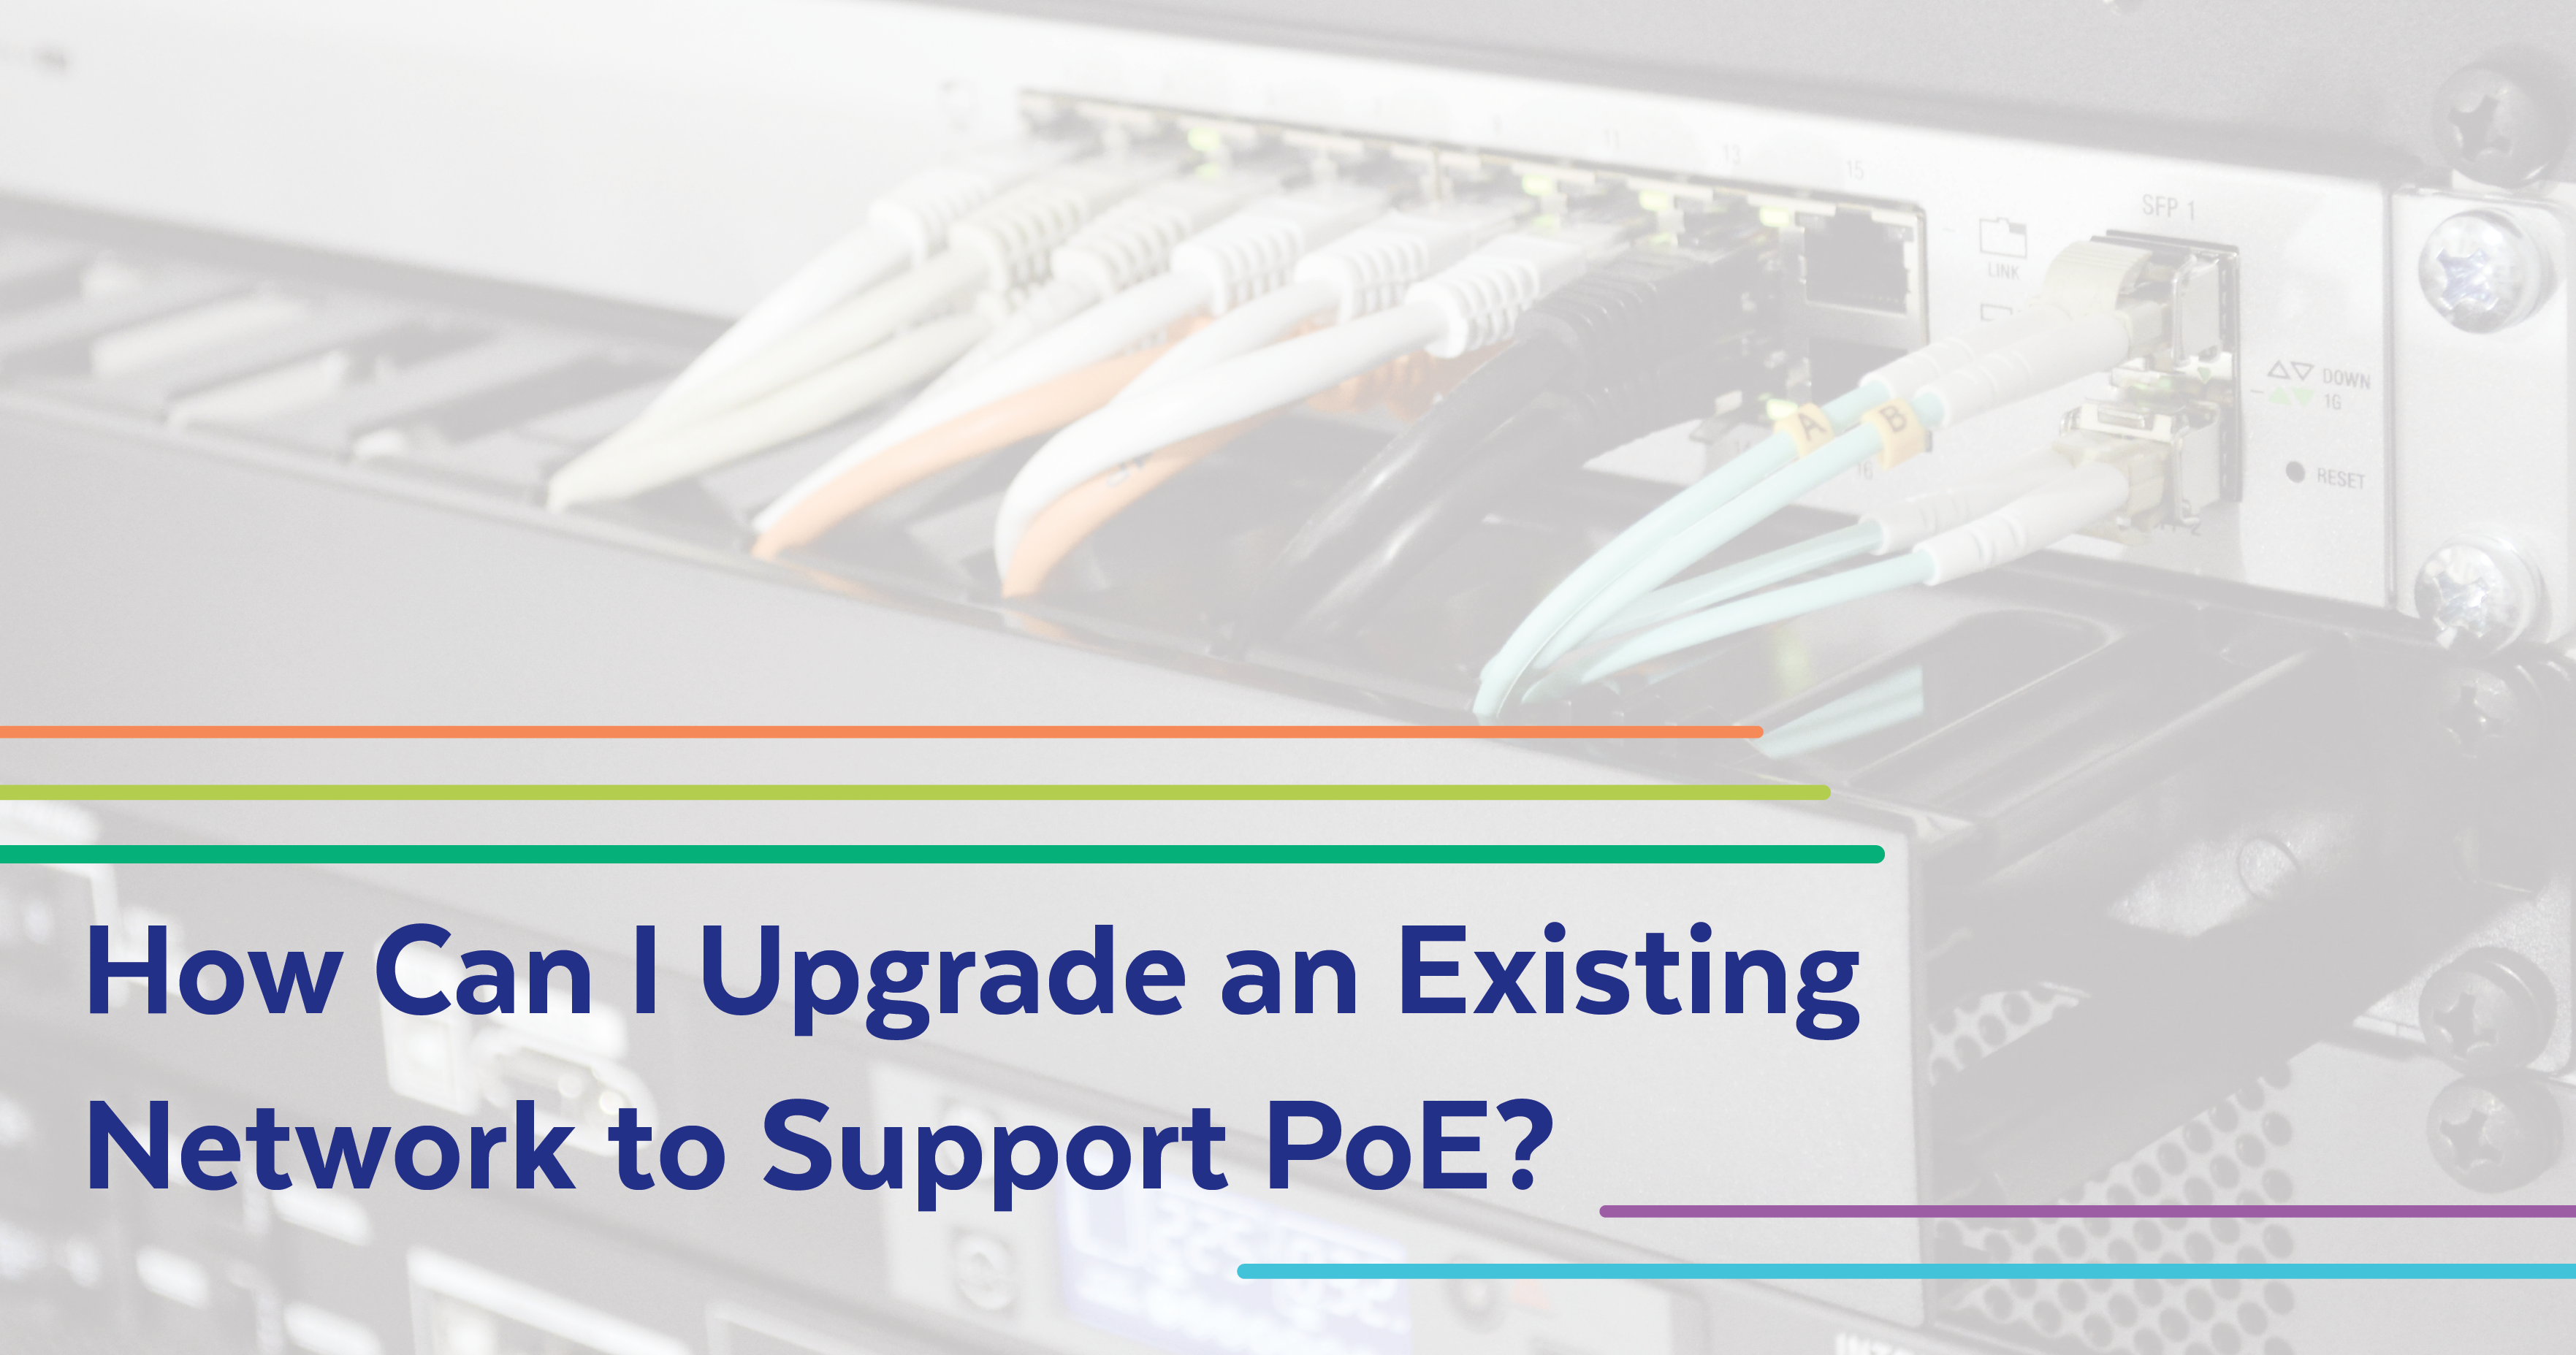 How Can I Upgrade an Existing Network to Support PoE?